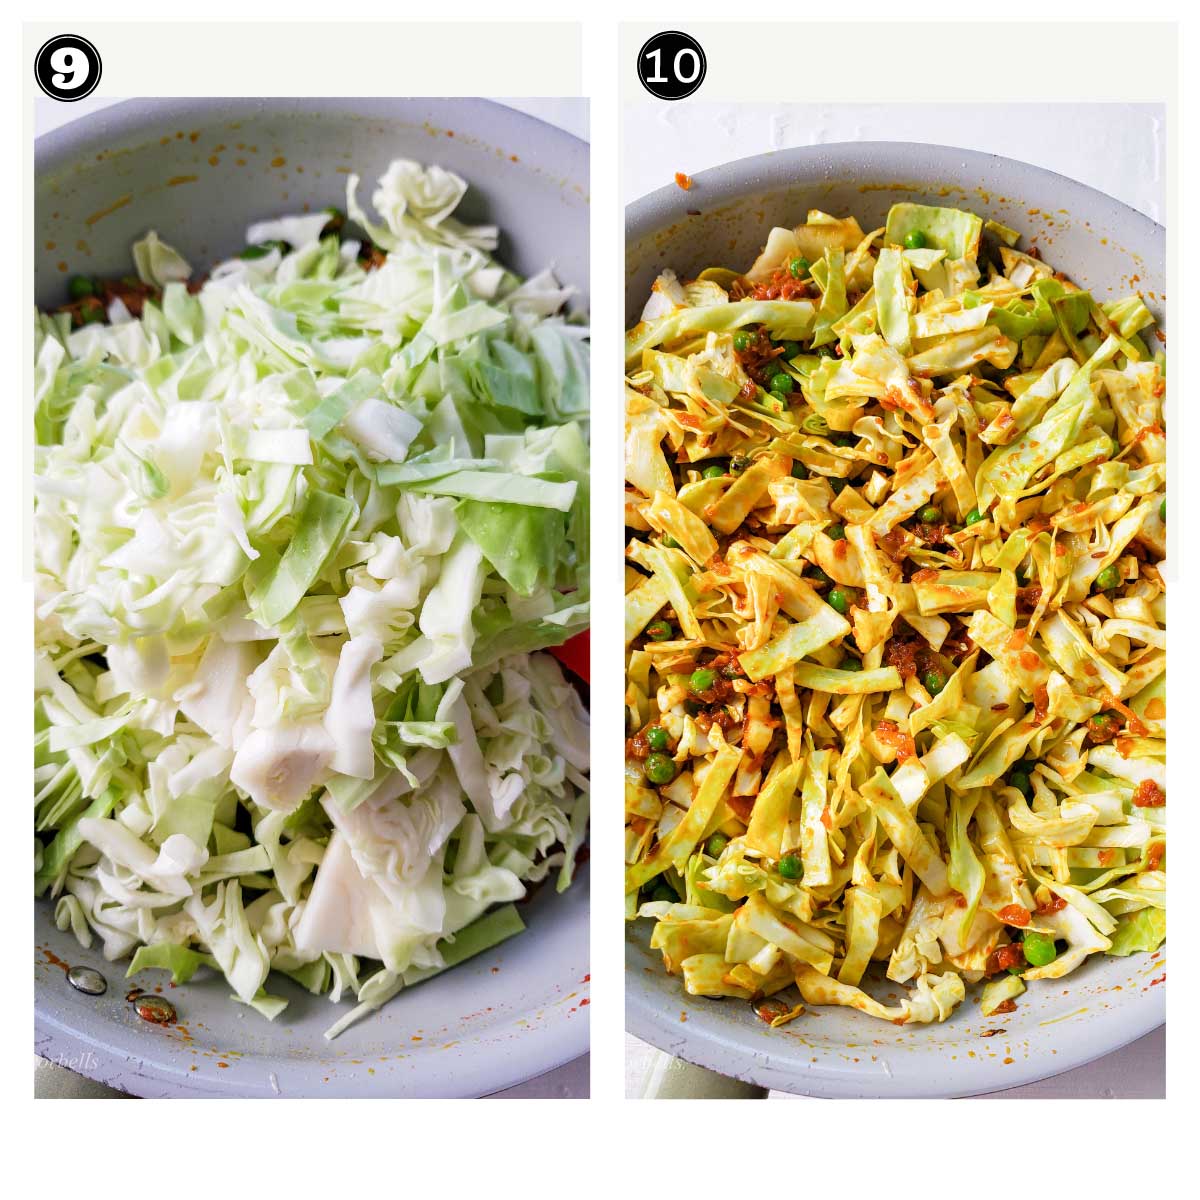 image showing folding chopped cabbage in prepared spices or masala